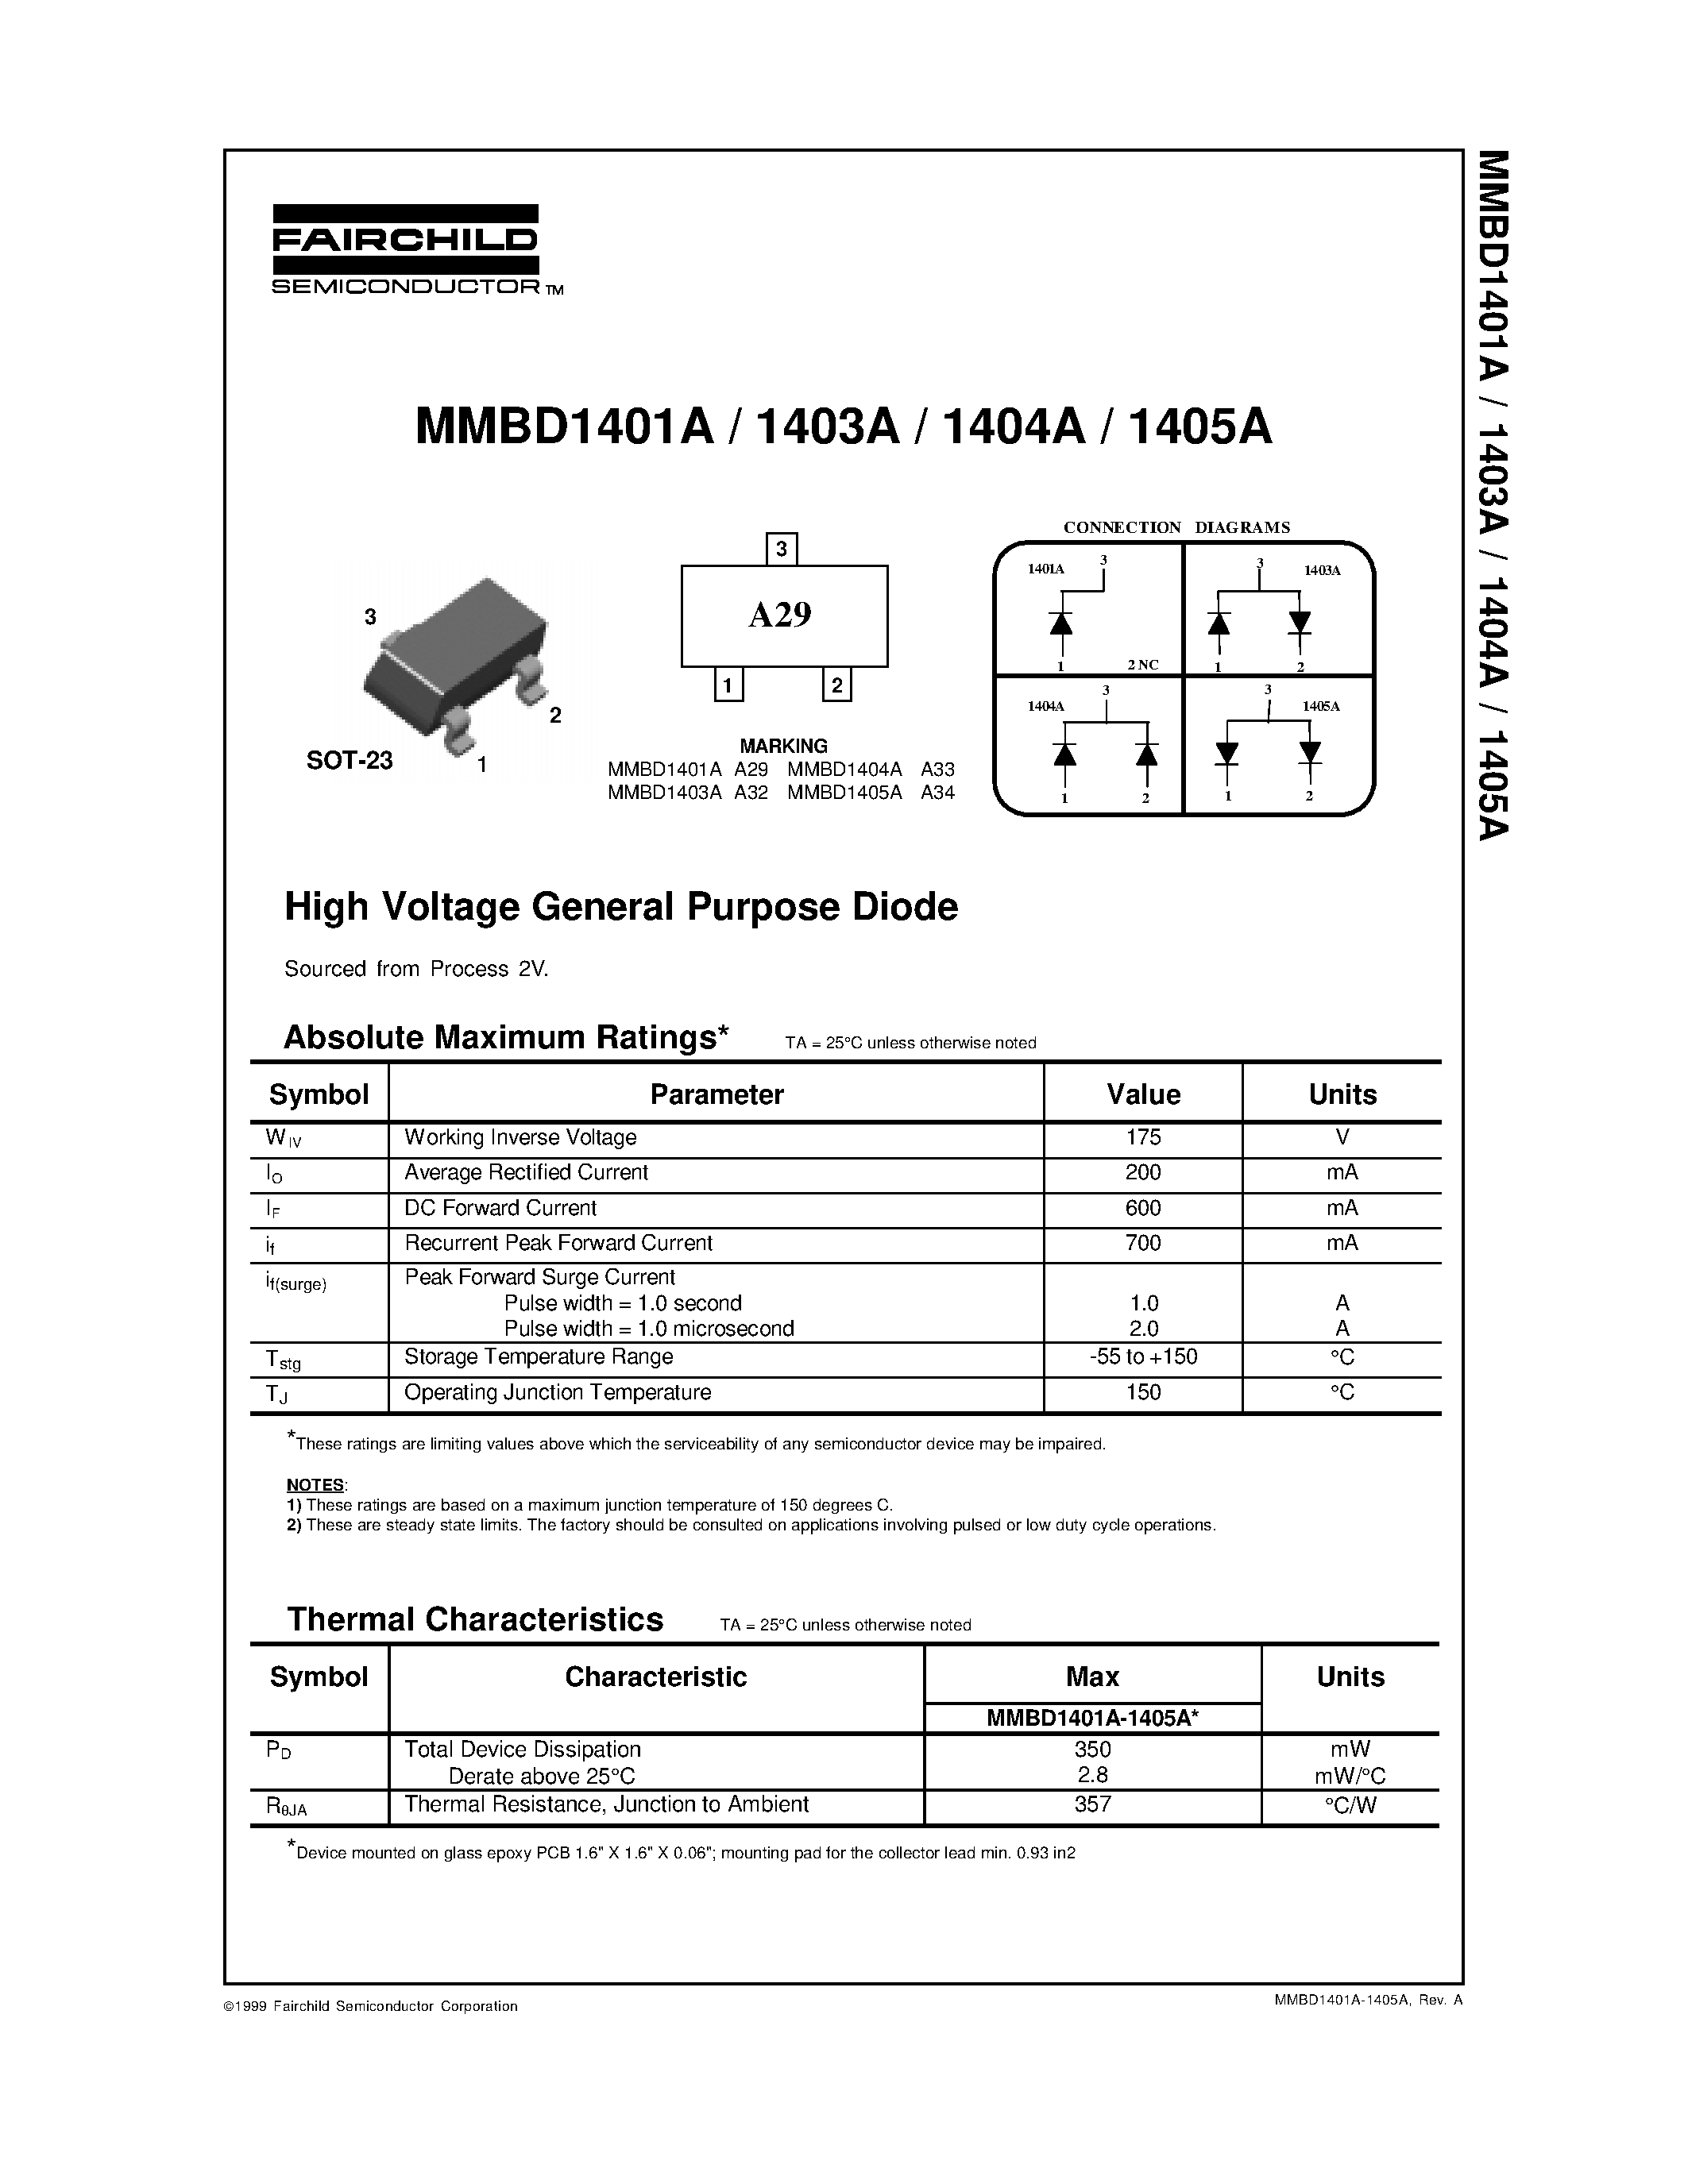 Datasheet MMBD1401A - High Voltage General Purpose Diode page 1